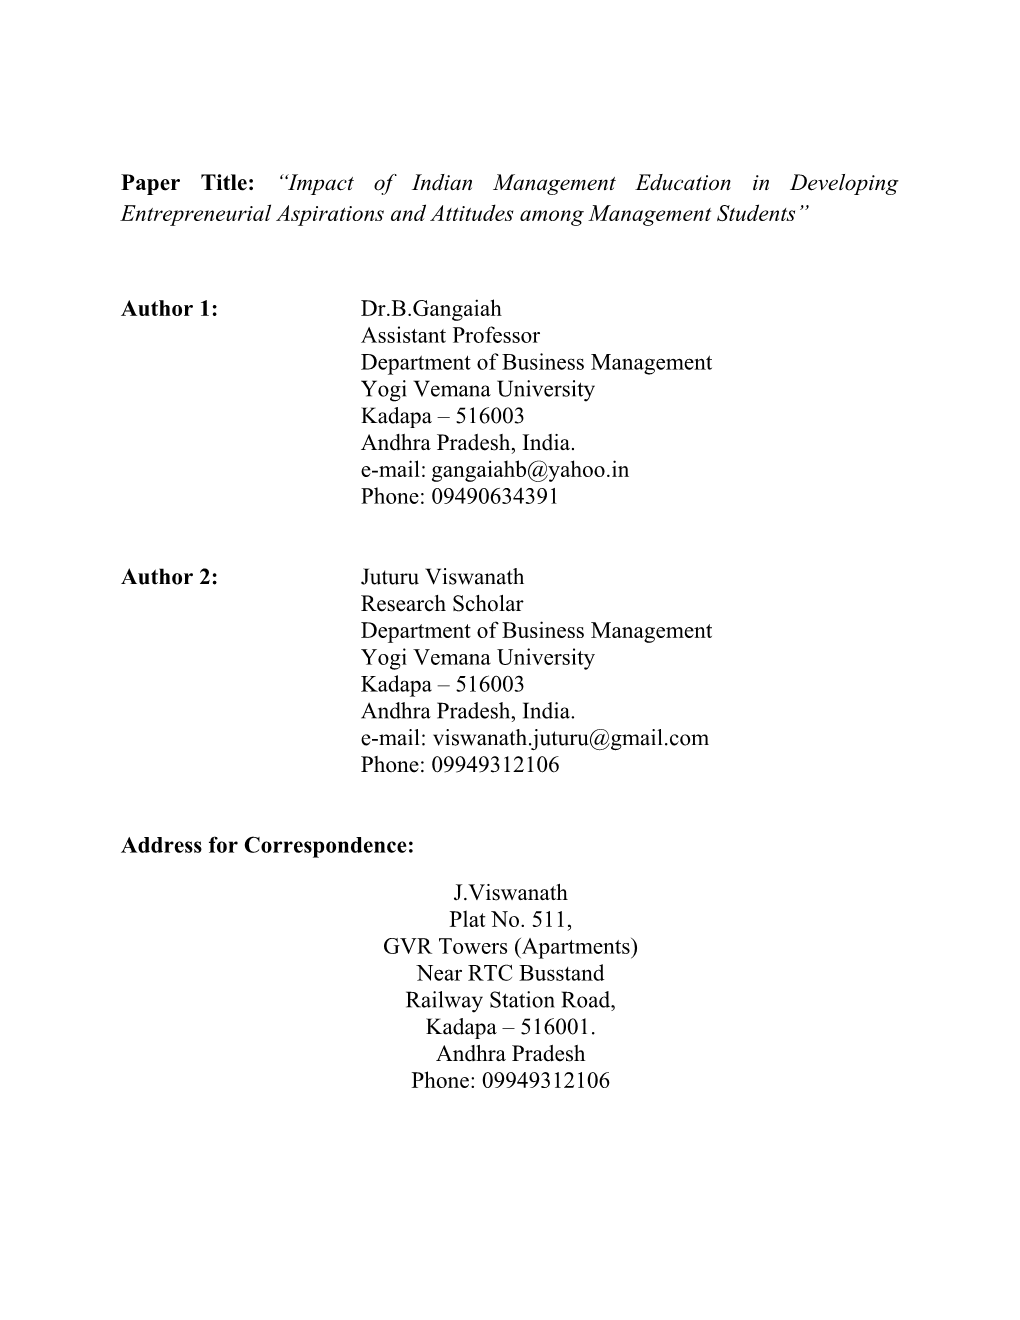 Paper Title: Impact of Indian Management Education in Developing Entrepreneurial Aspirations